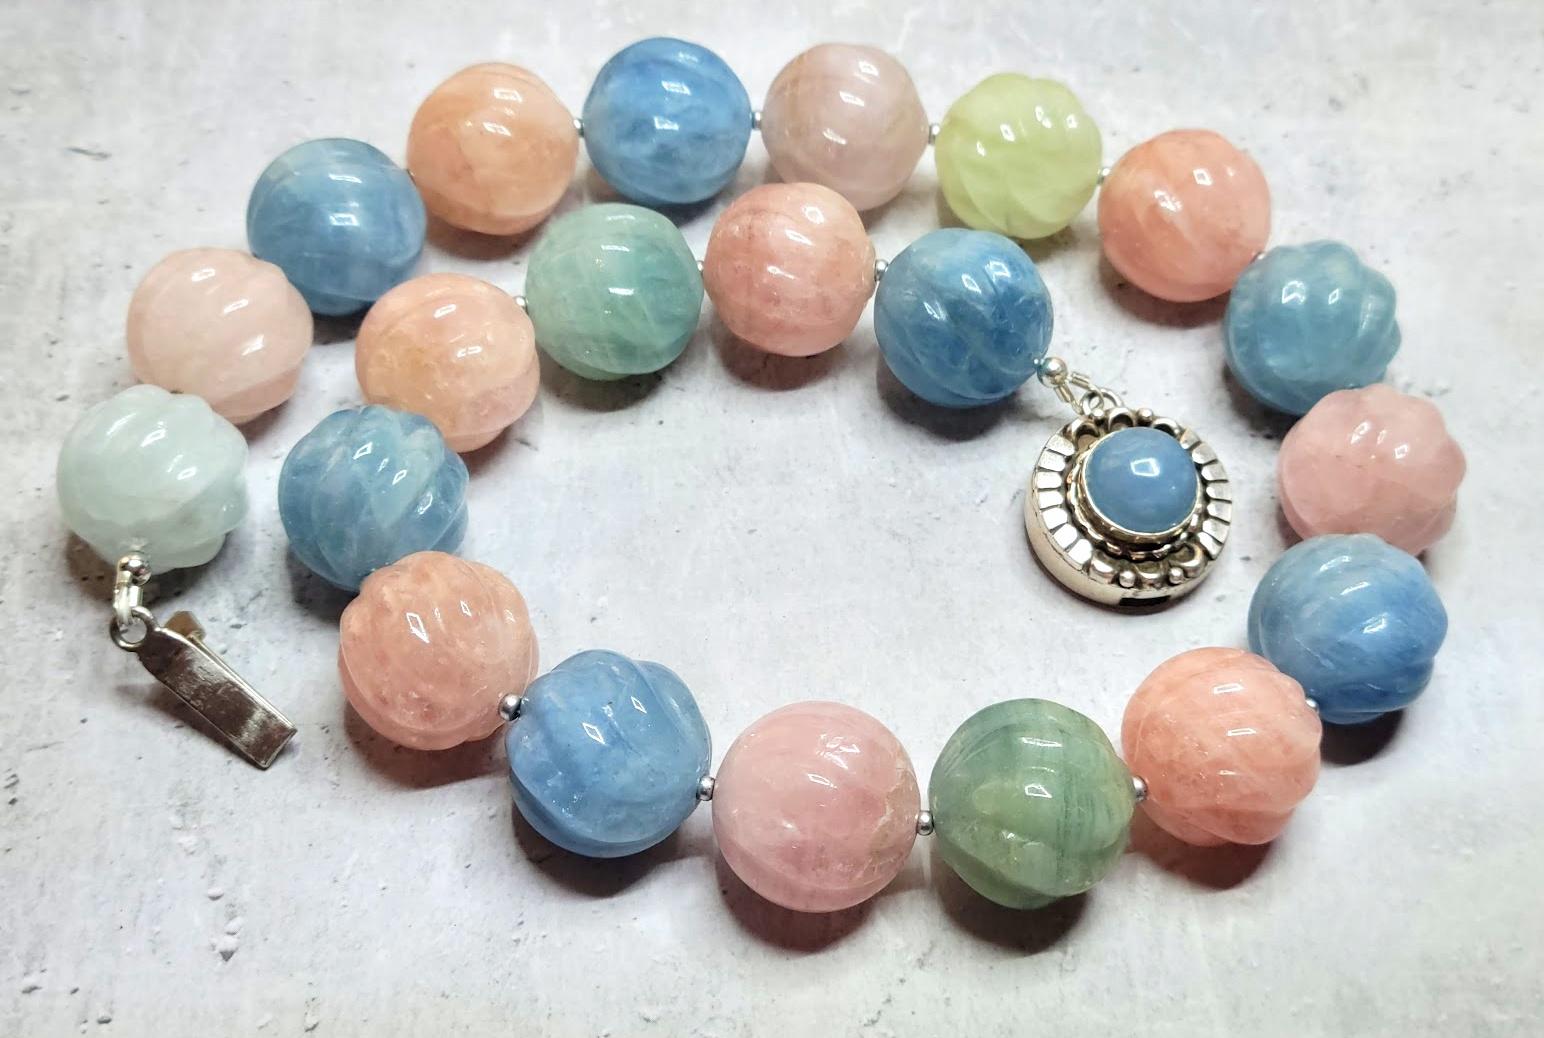 The length of the necklace is 18.5 inches (47 cm). The massive size of the rare carved beads is 18 mm.
The color of the beads is a soft shade of light green, light blue, pale peachy pink, and pale orange. Very gentle soft pastel colors! Huge